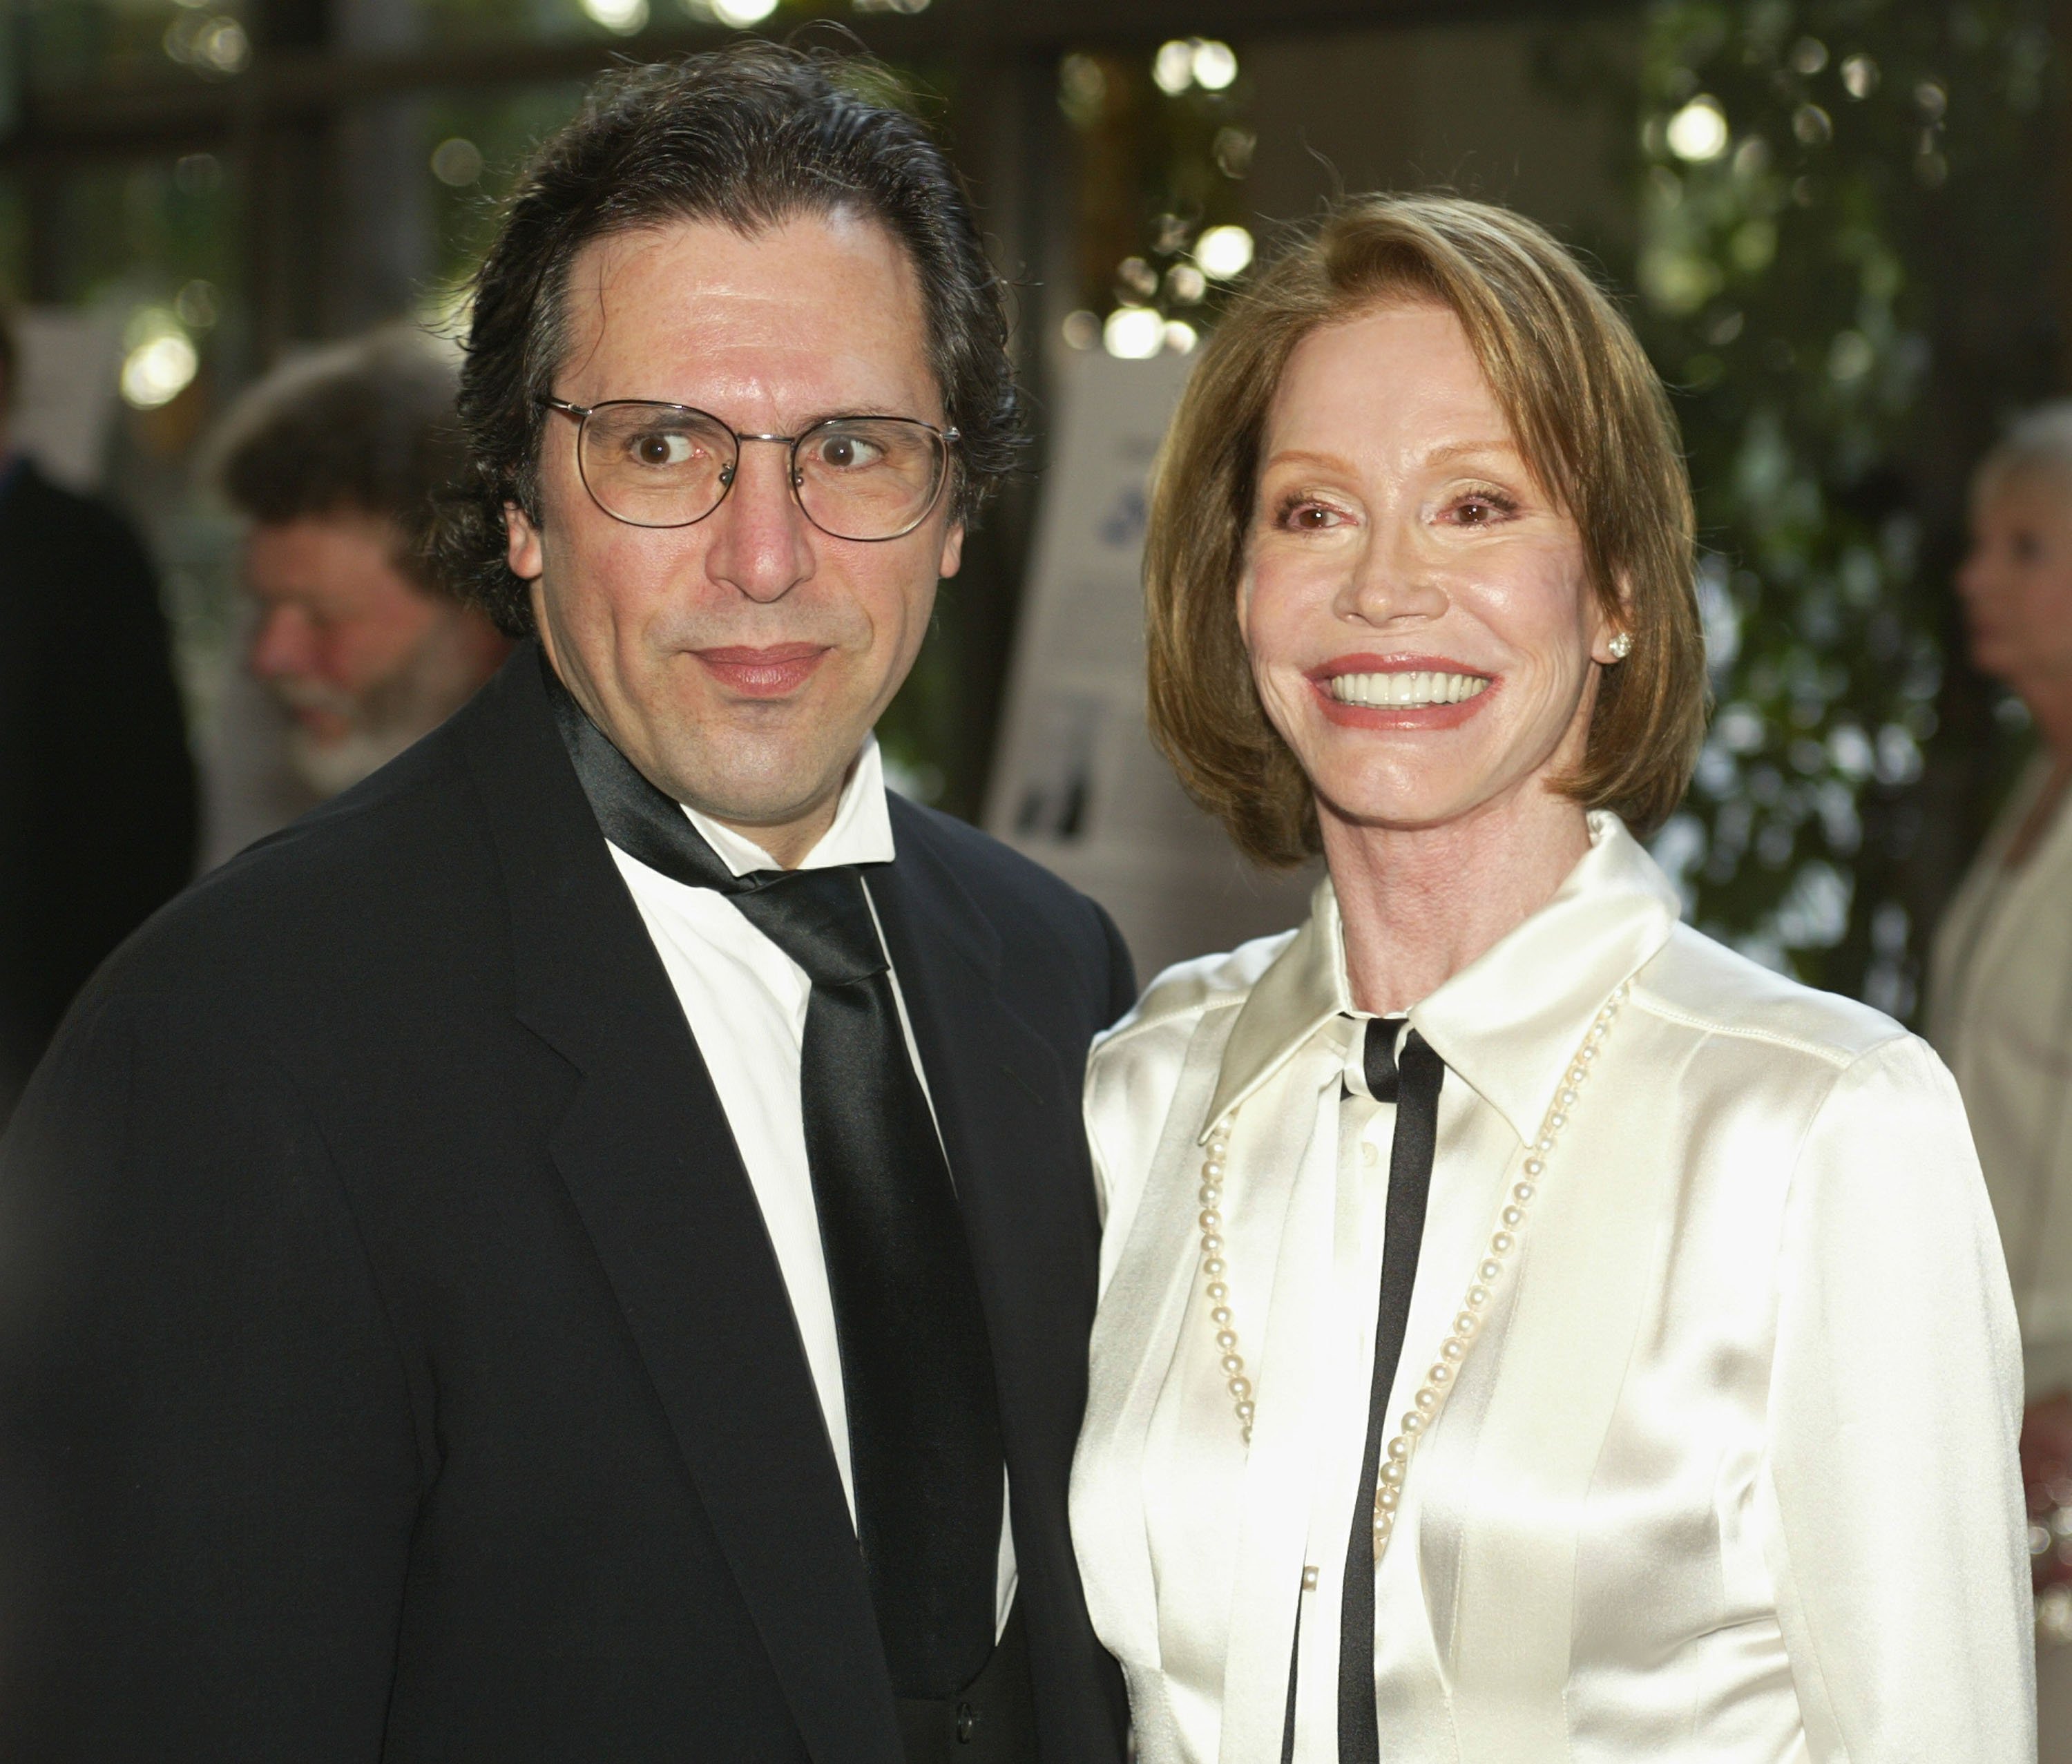 Mary Tyler Moore and Dr. Robert Levine at the American Screenwriters Associations' "2002 Screenwriting Hall of Fame Awards" at the Sheraton Universal Hotel on August 3, 2002 in Los Angeles, California | Photo: Getty Images